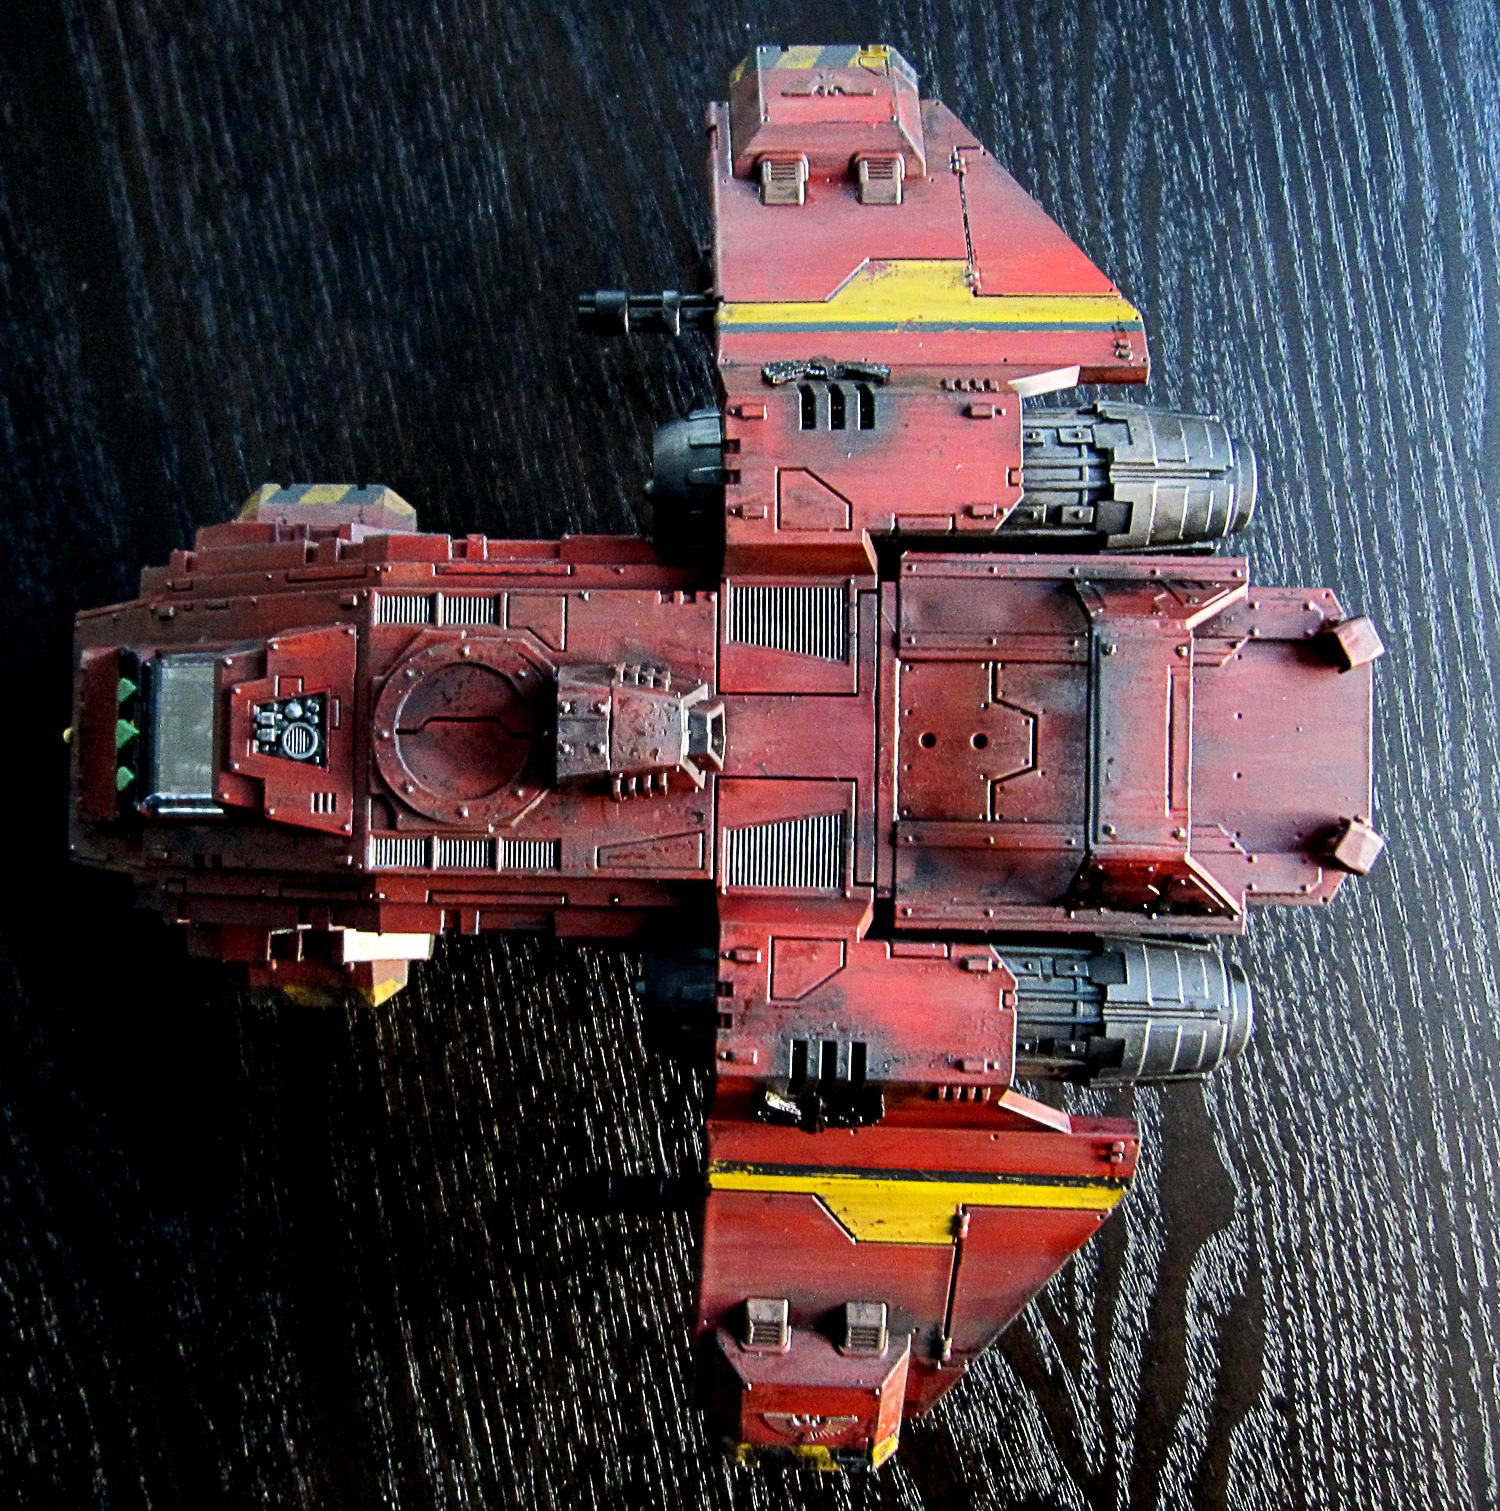 MT11 StormRaven P.I.P, about 80% there